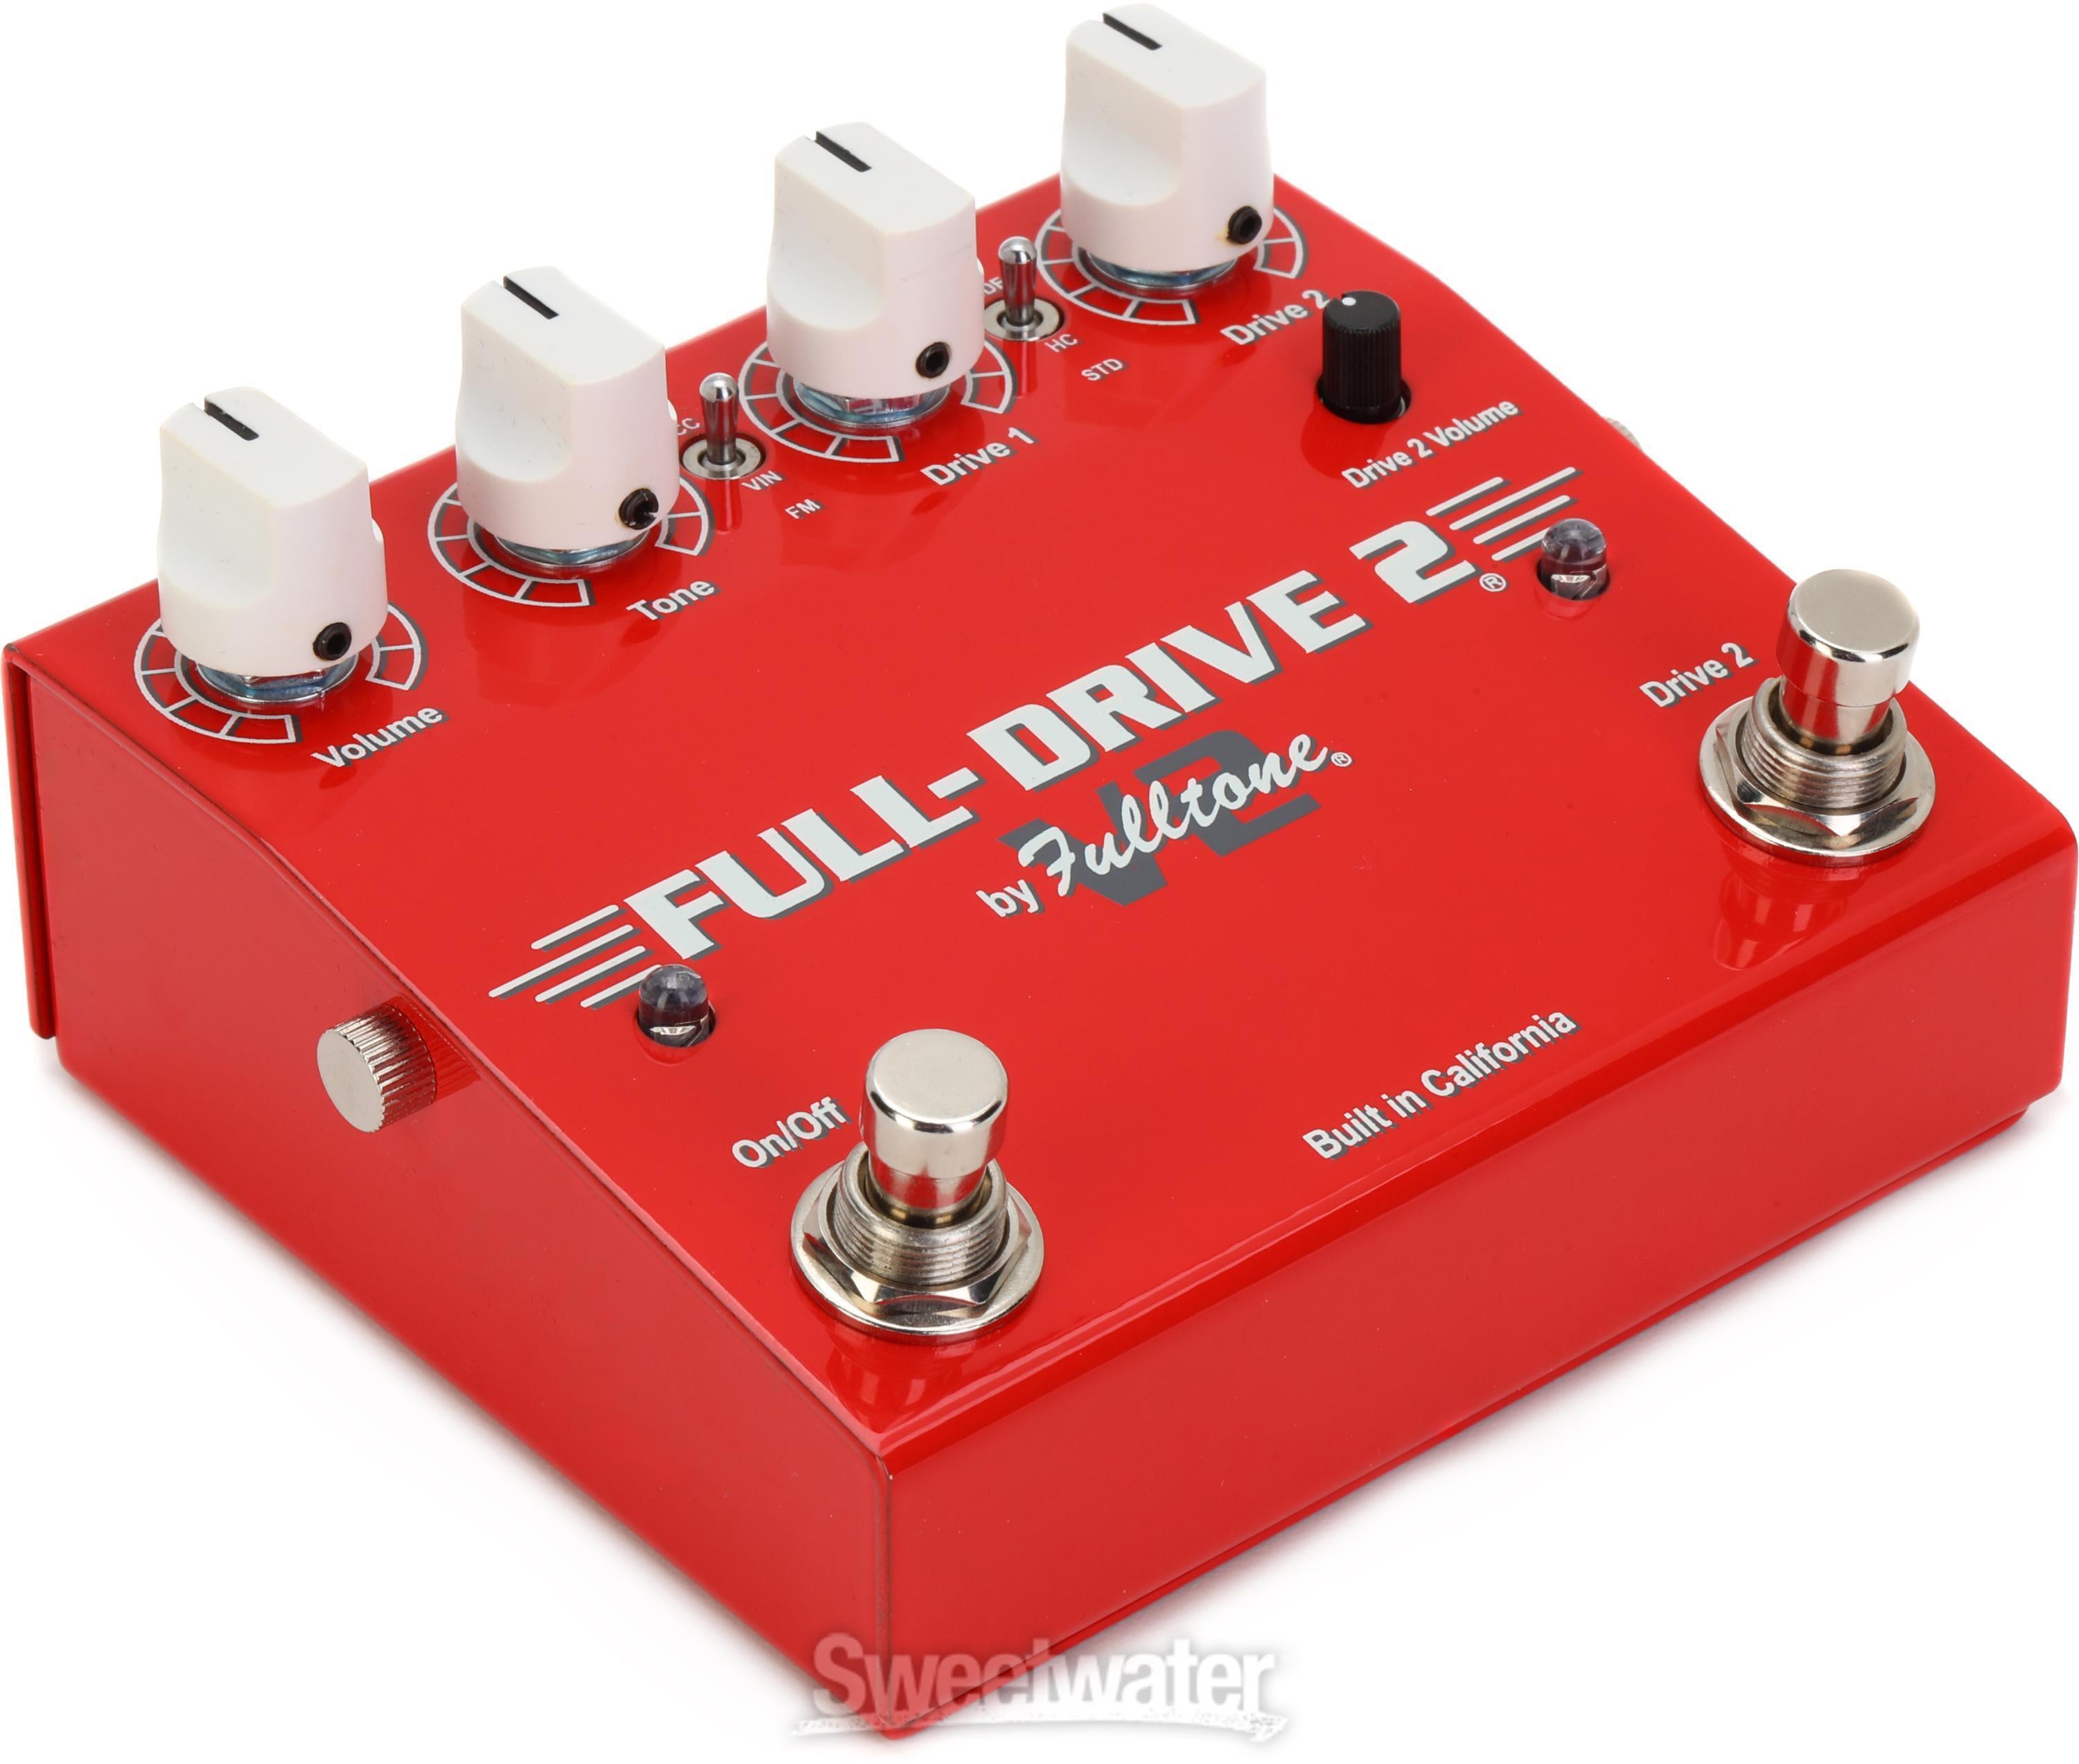 Fulltone Full-Drive 2 V2 Overdrive Pedal with Boost